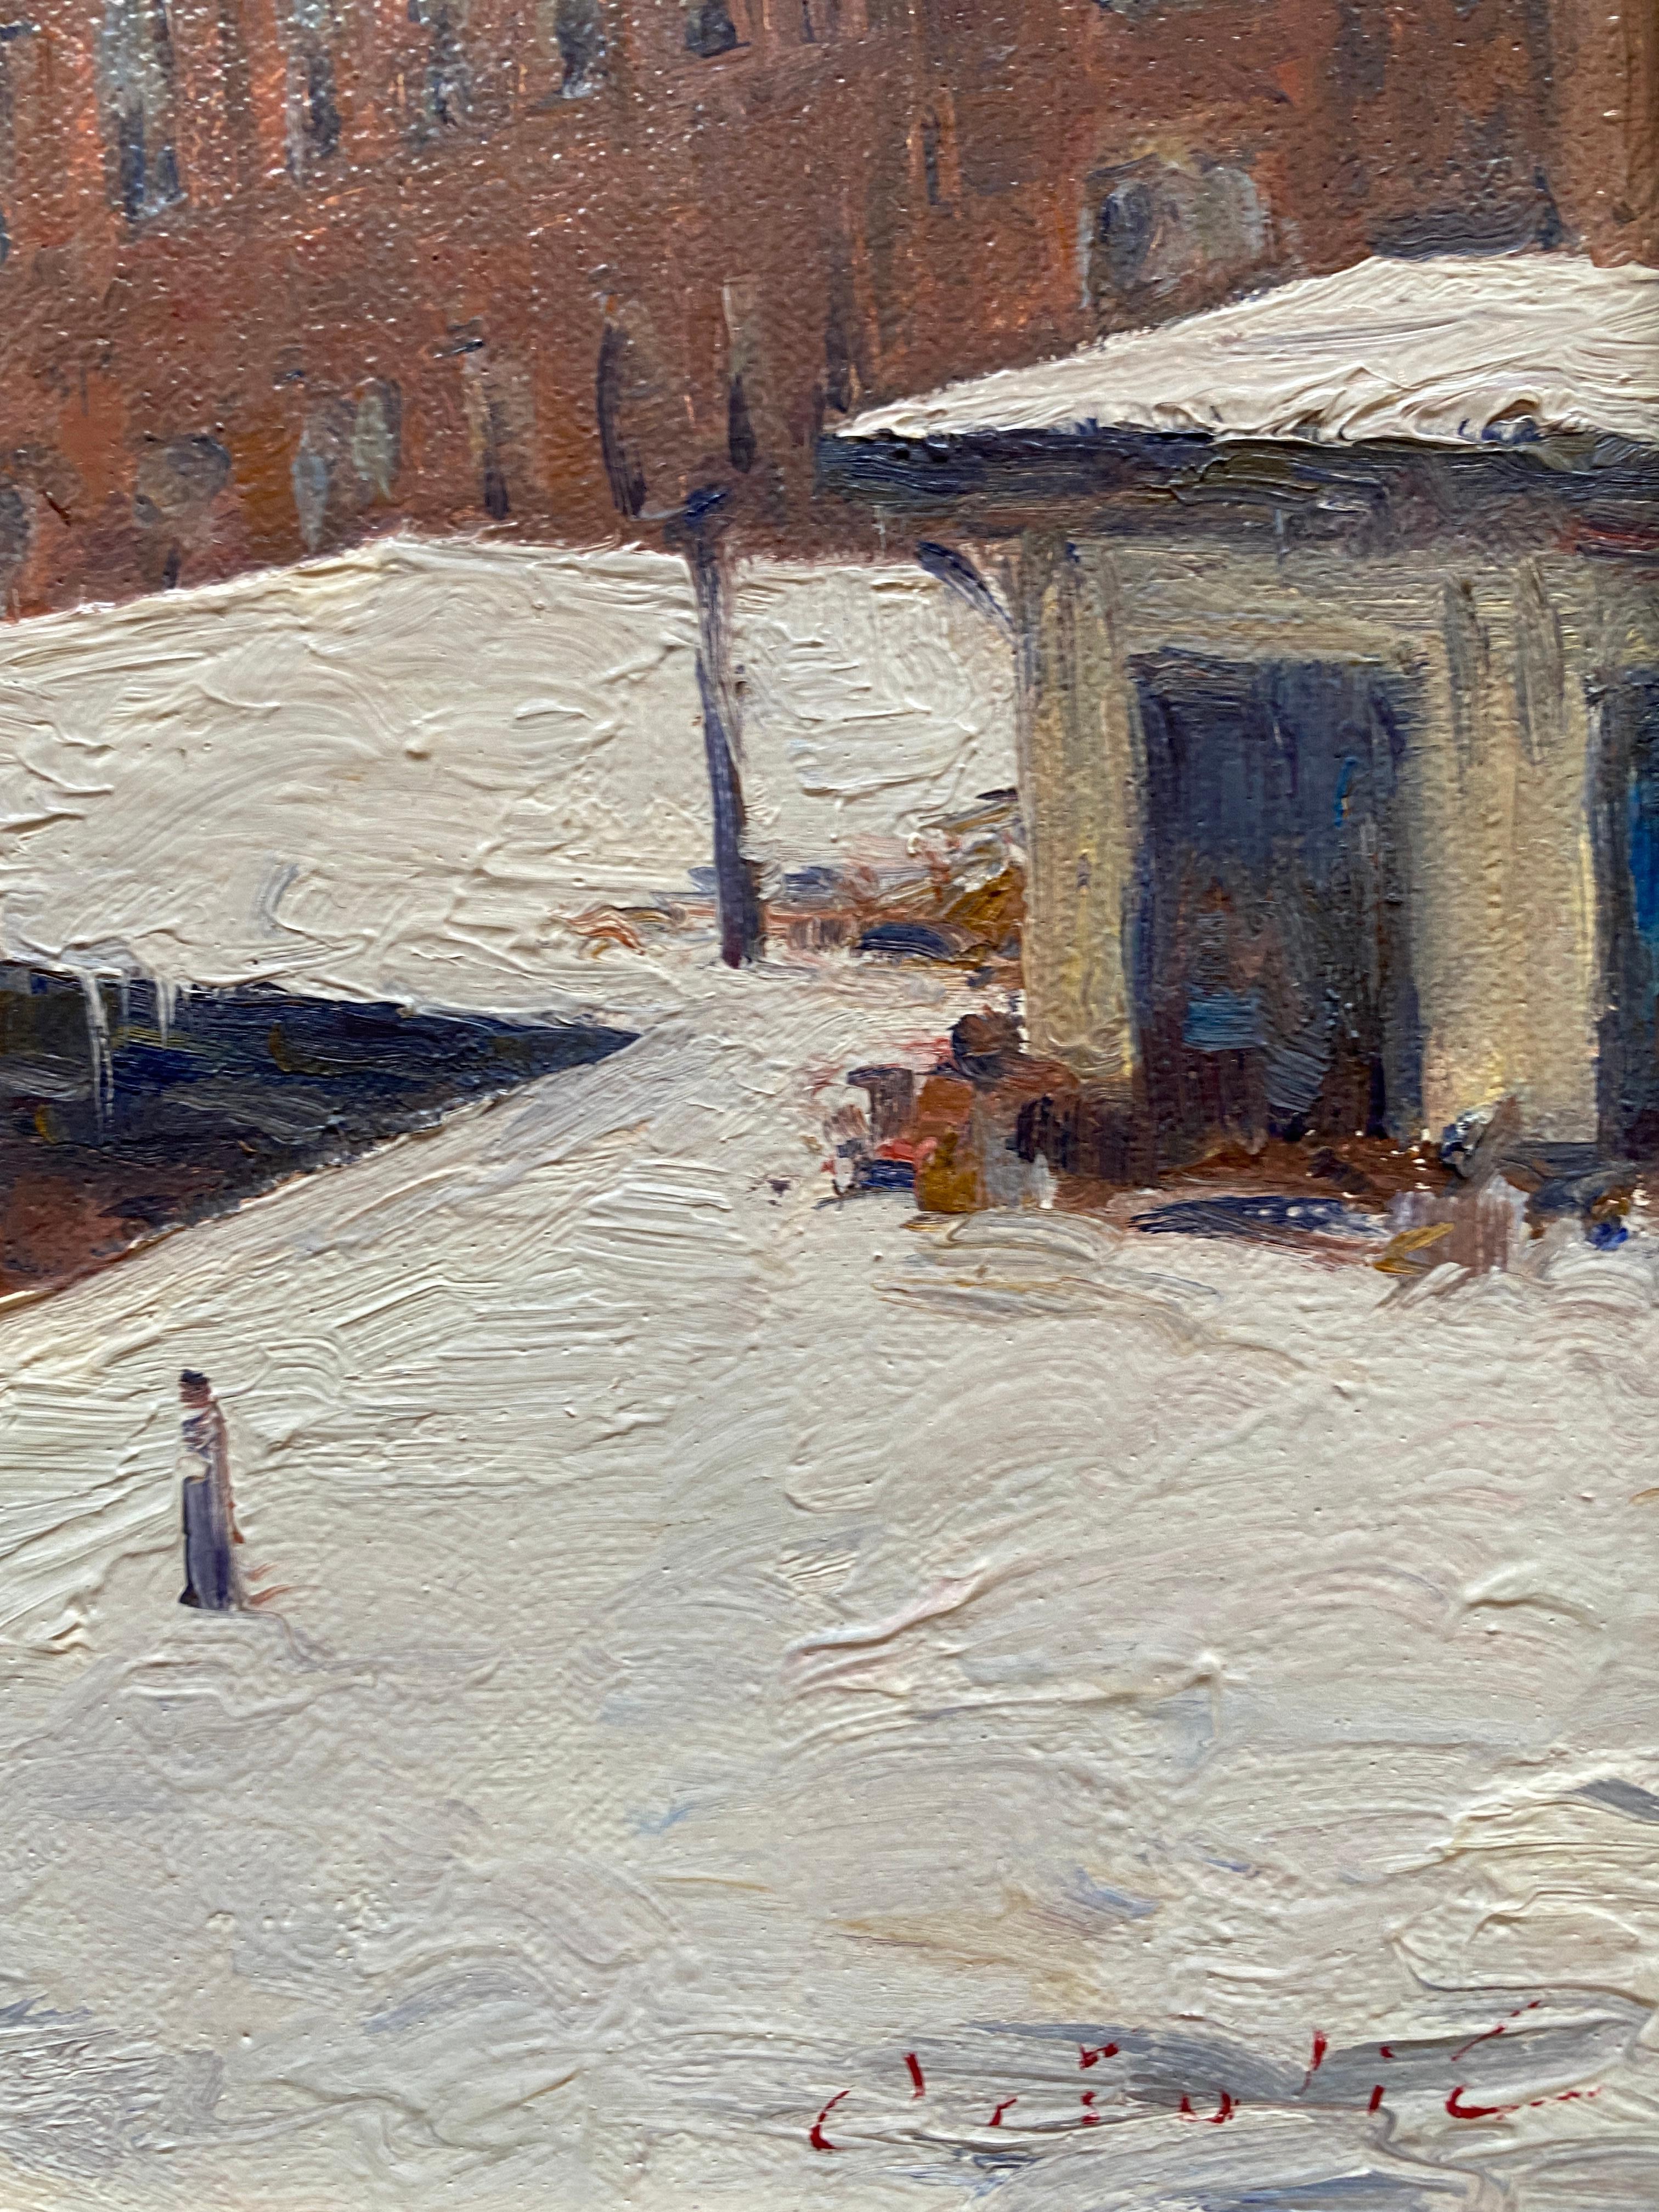 Waltham Mills Rooftops in the Snow - Impressionist Painting by Tina Orsolic Dalessio